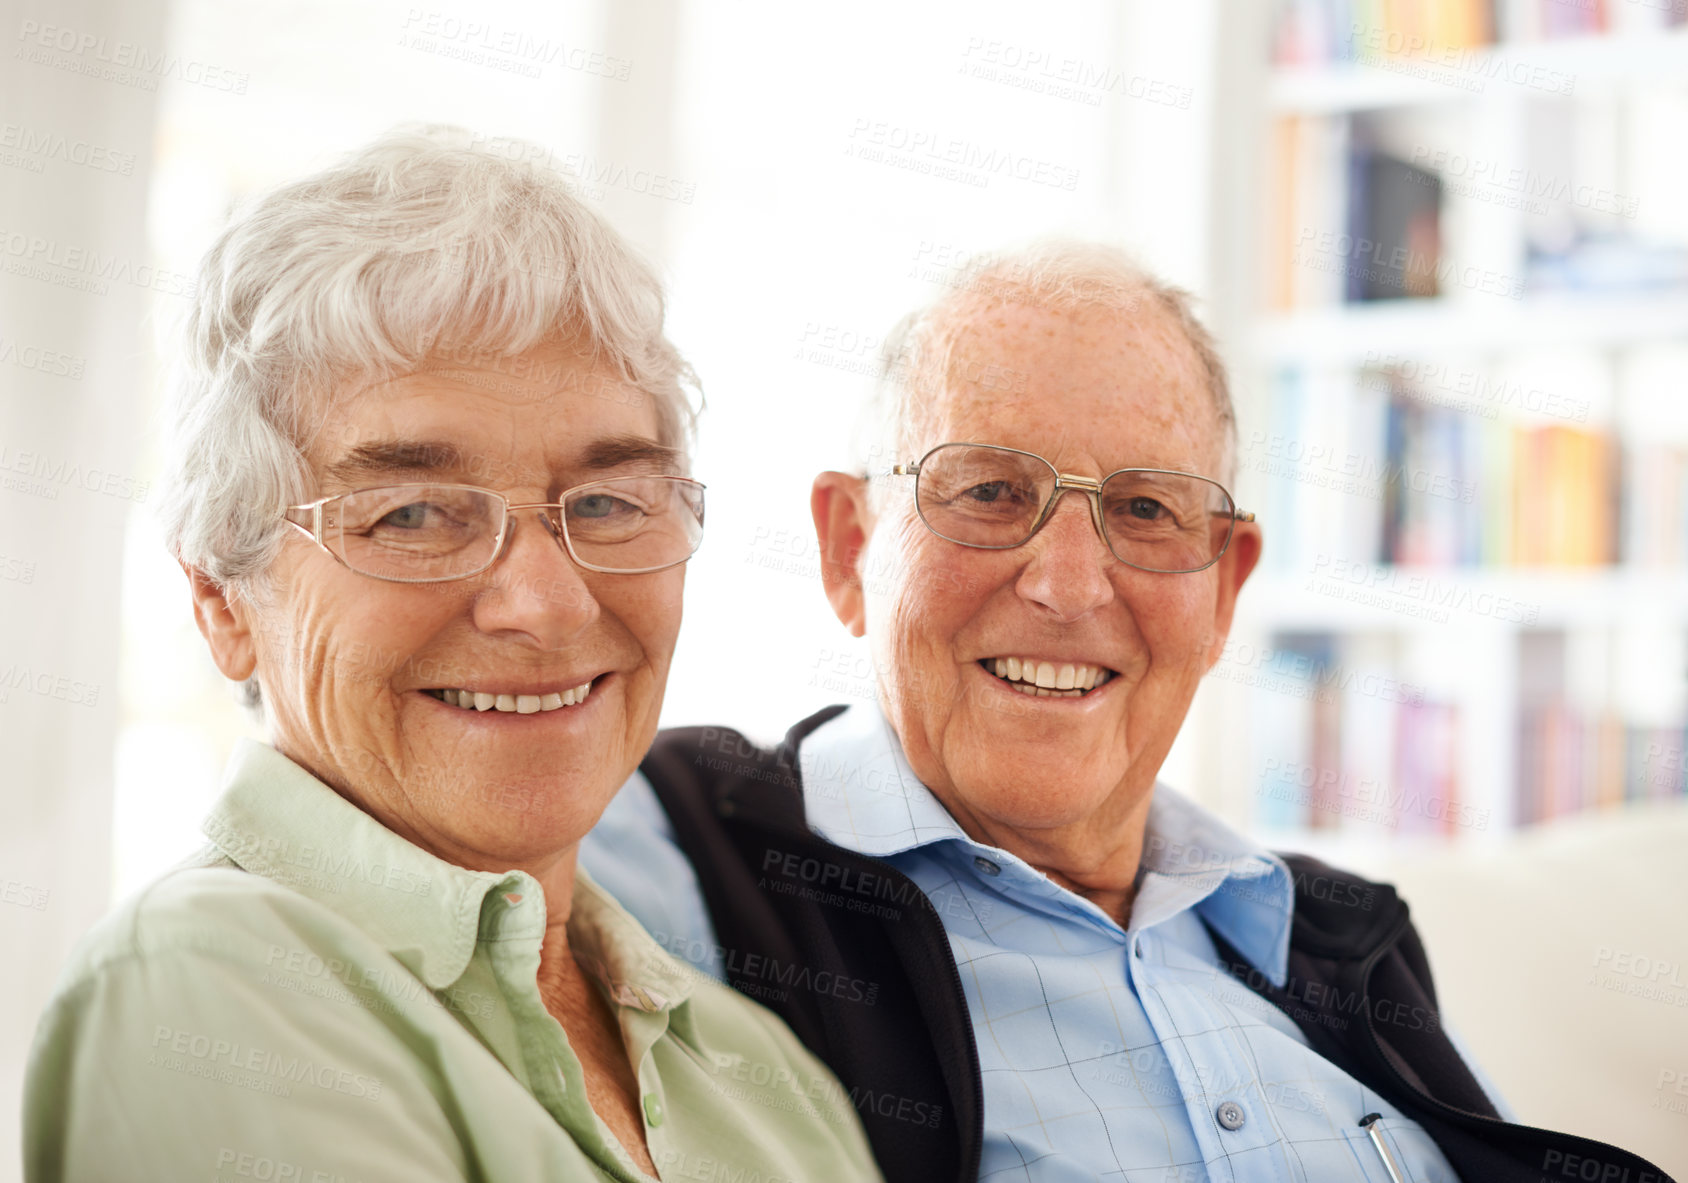 Buy stock photo An aged couple at home together